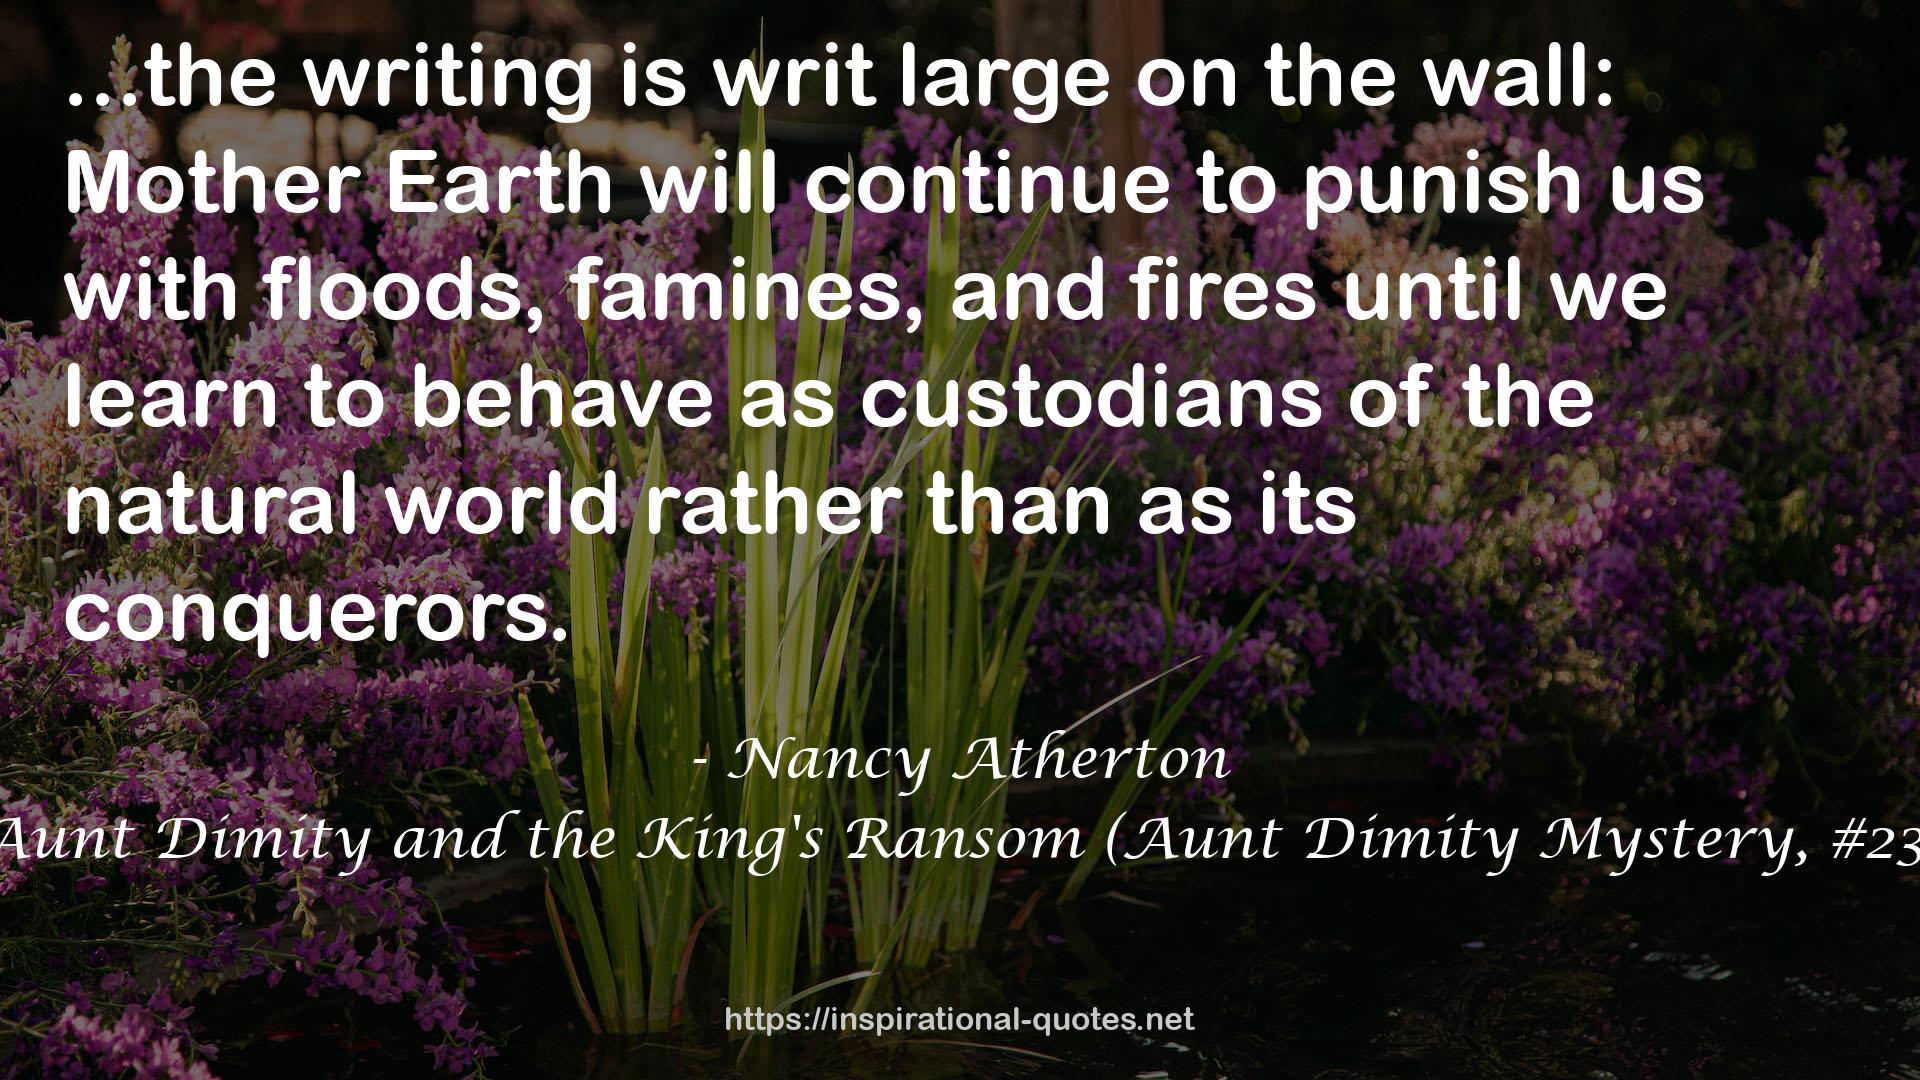 Aunt Dimity and the King's Ransom (Aunt Dimity Mystery, #23) QUOTES